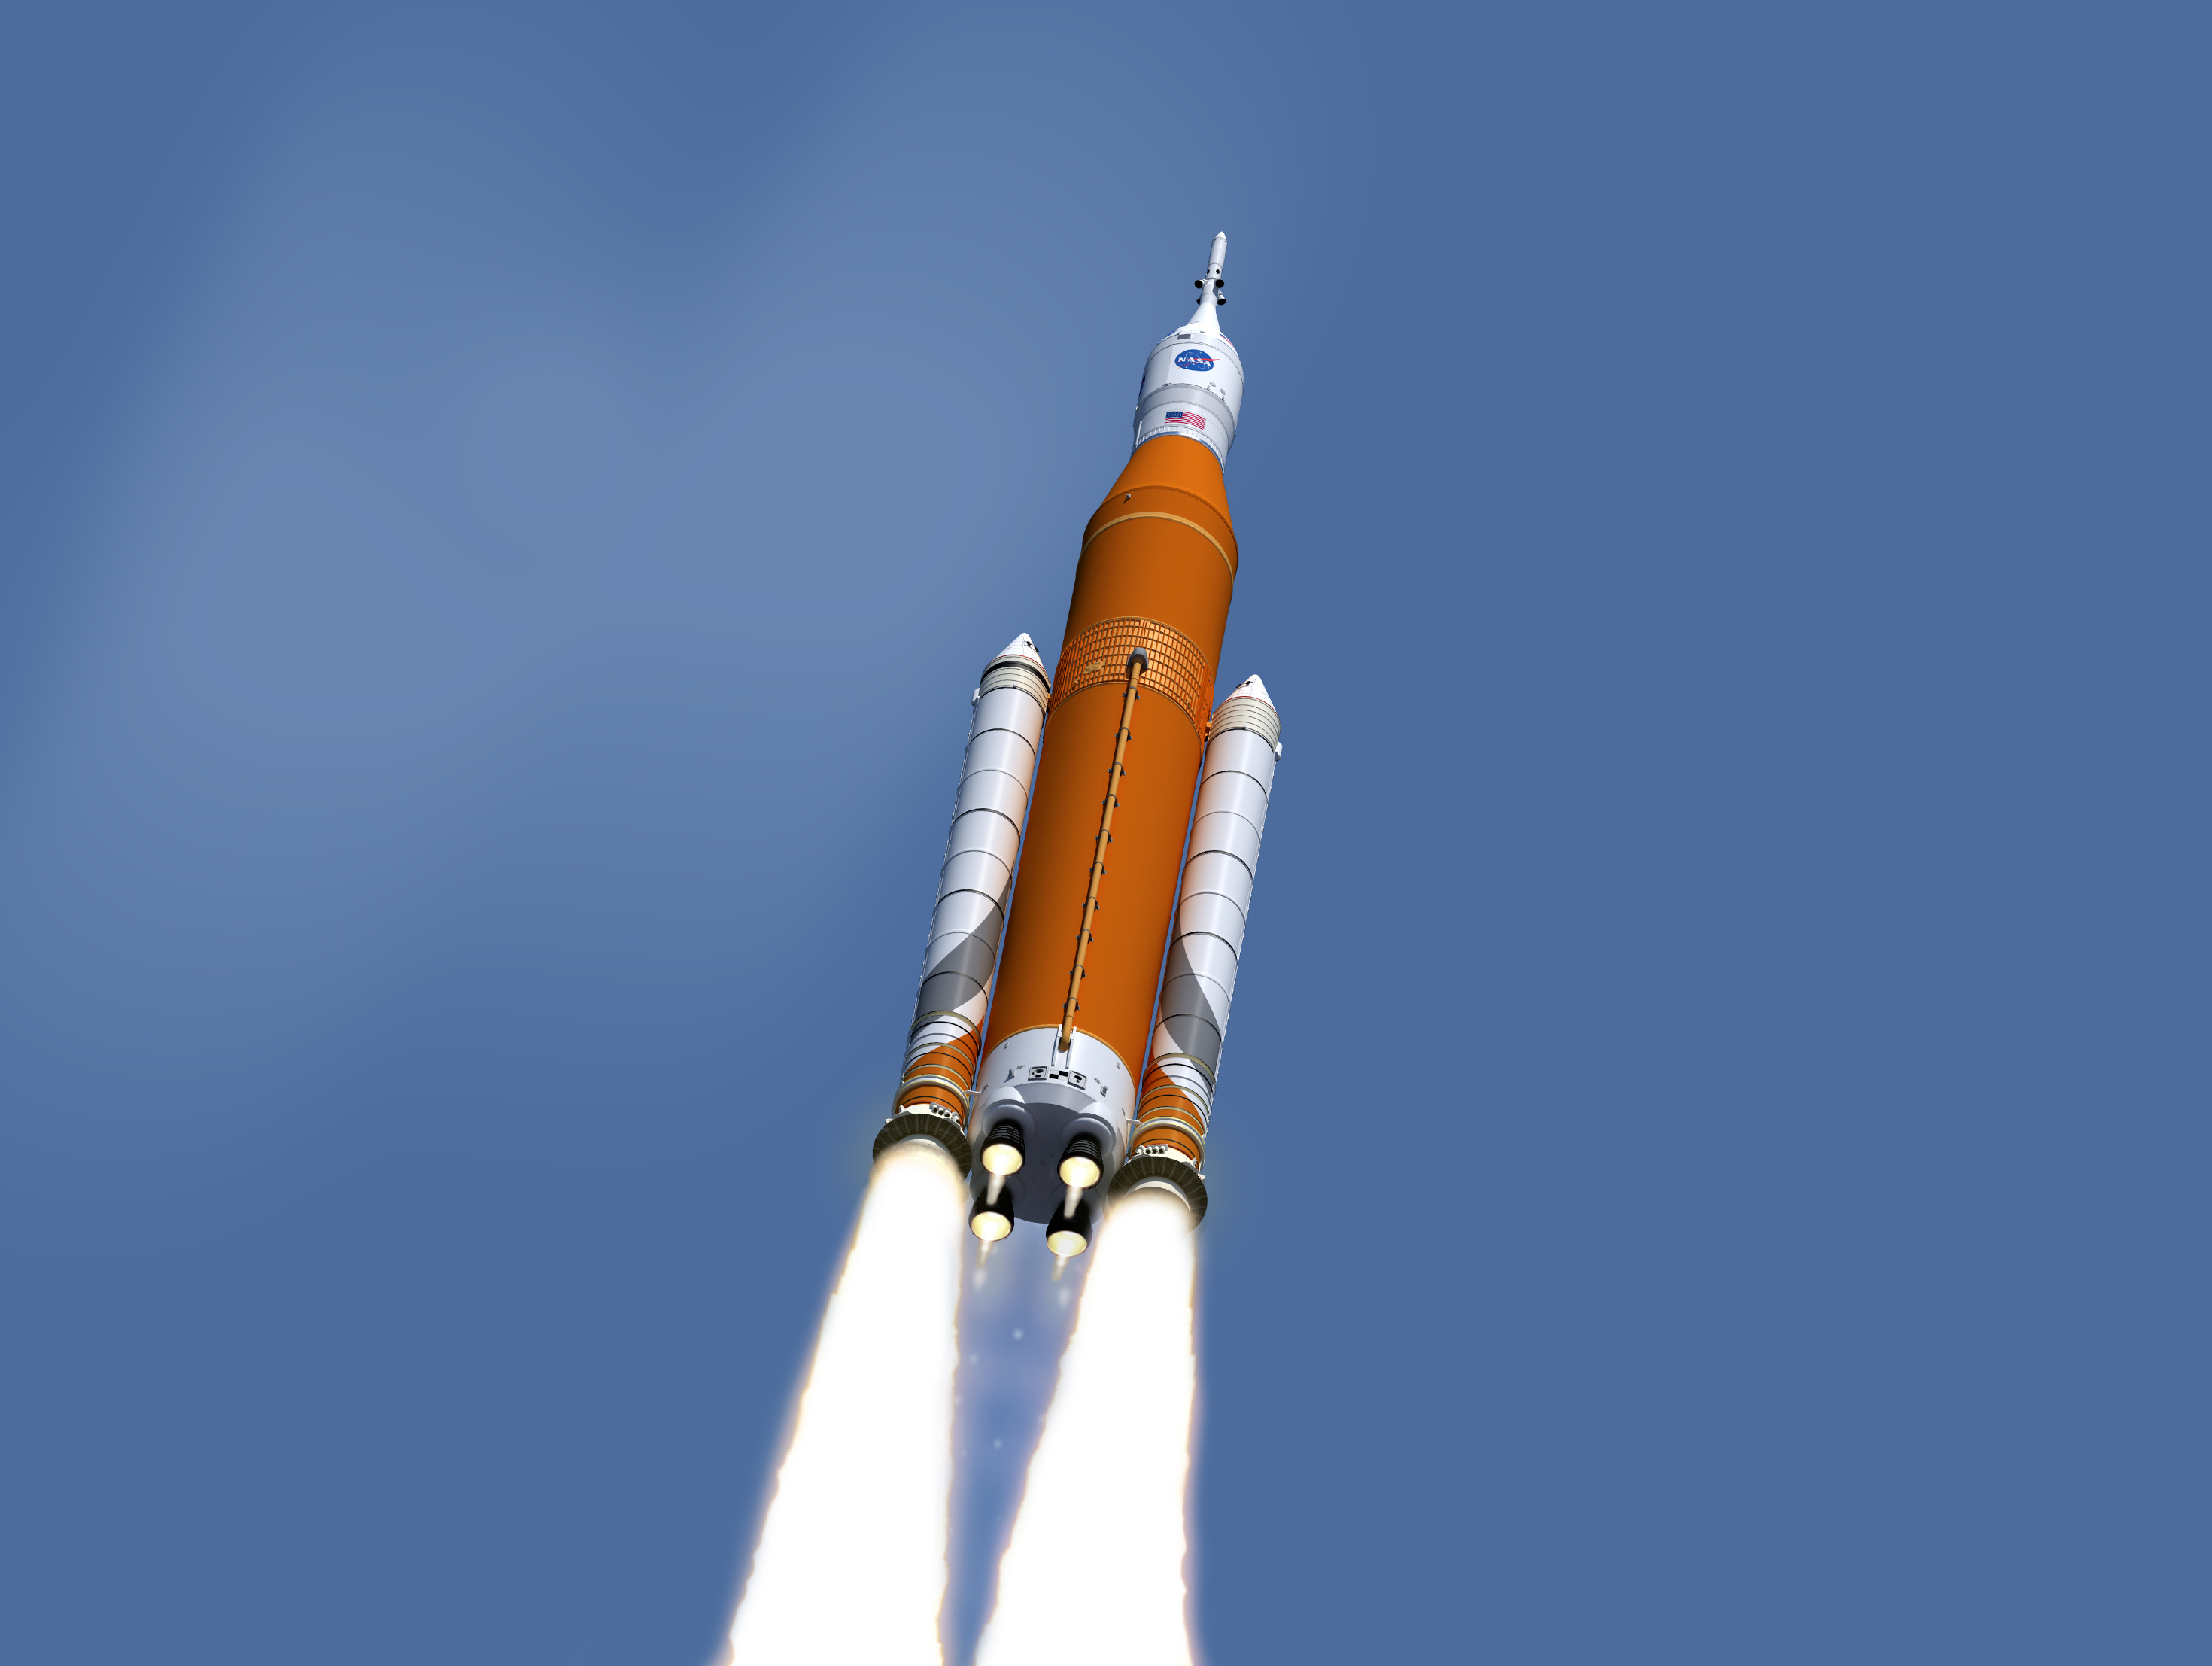 Artist's rendering of the NASA Space Launch System (SLS) launch vehicle